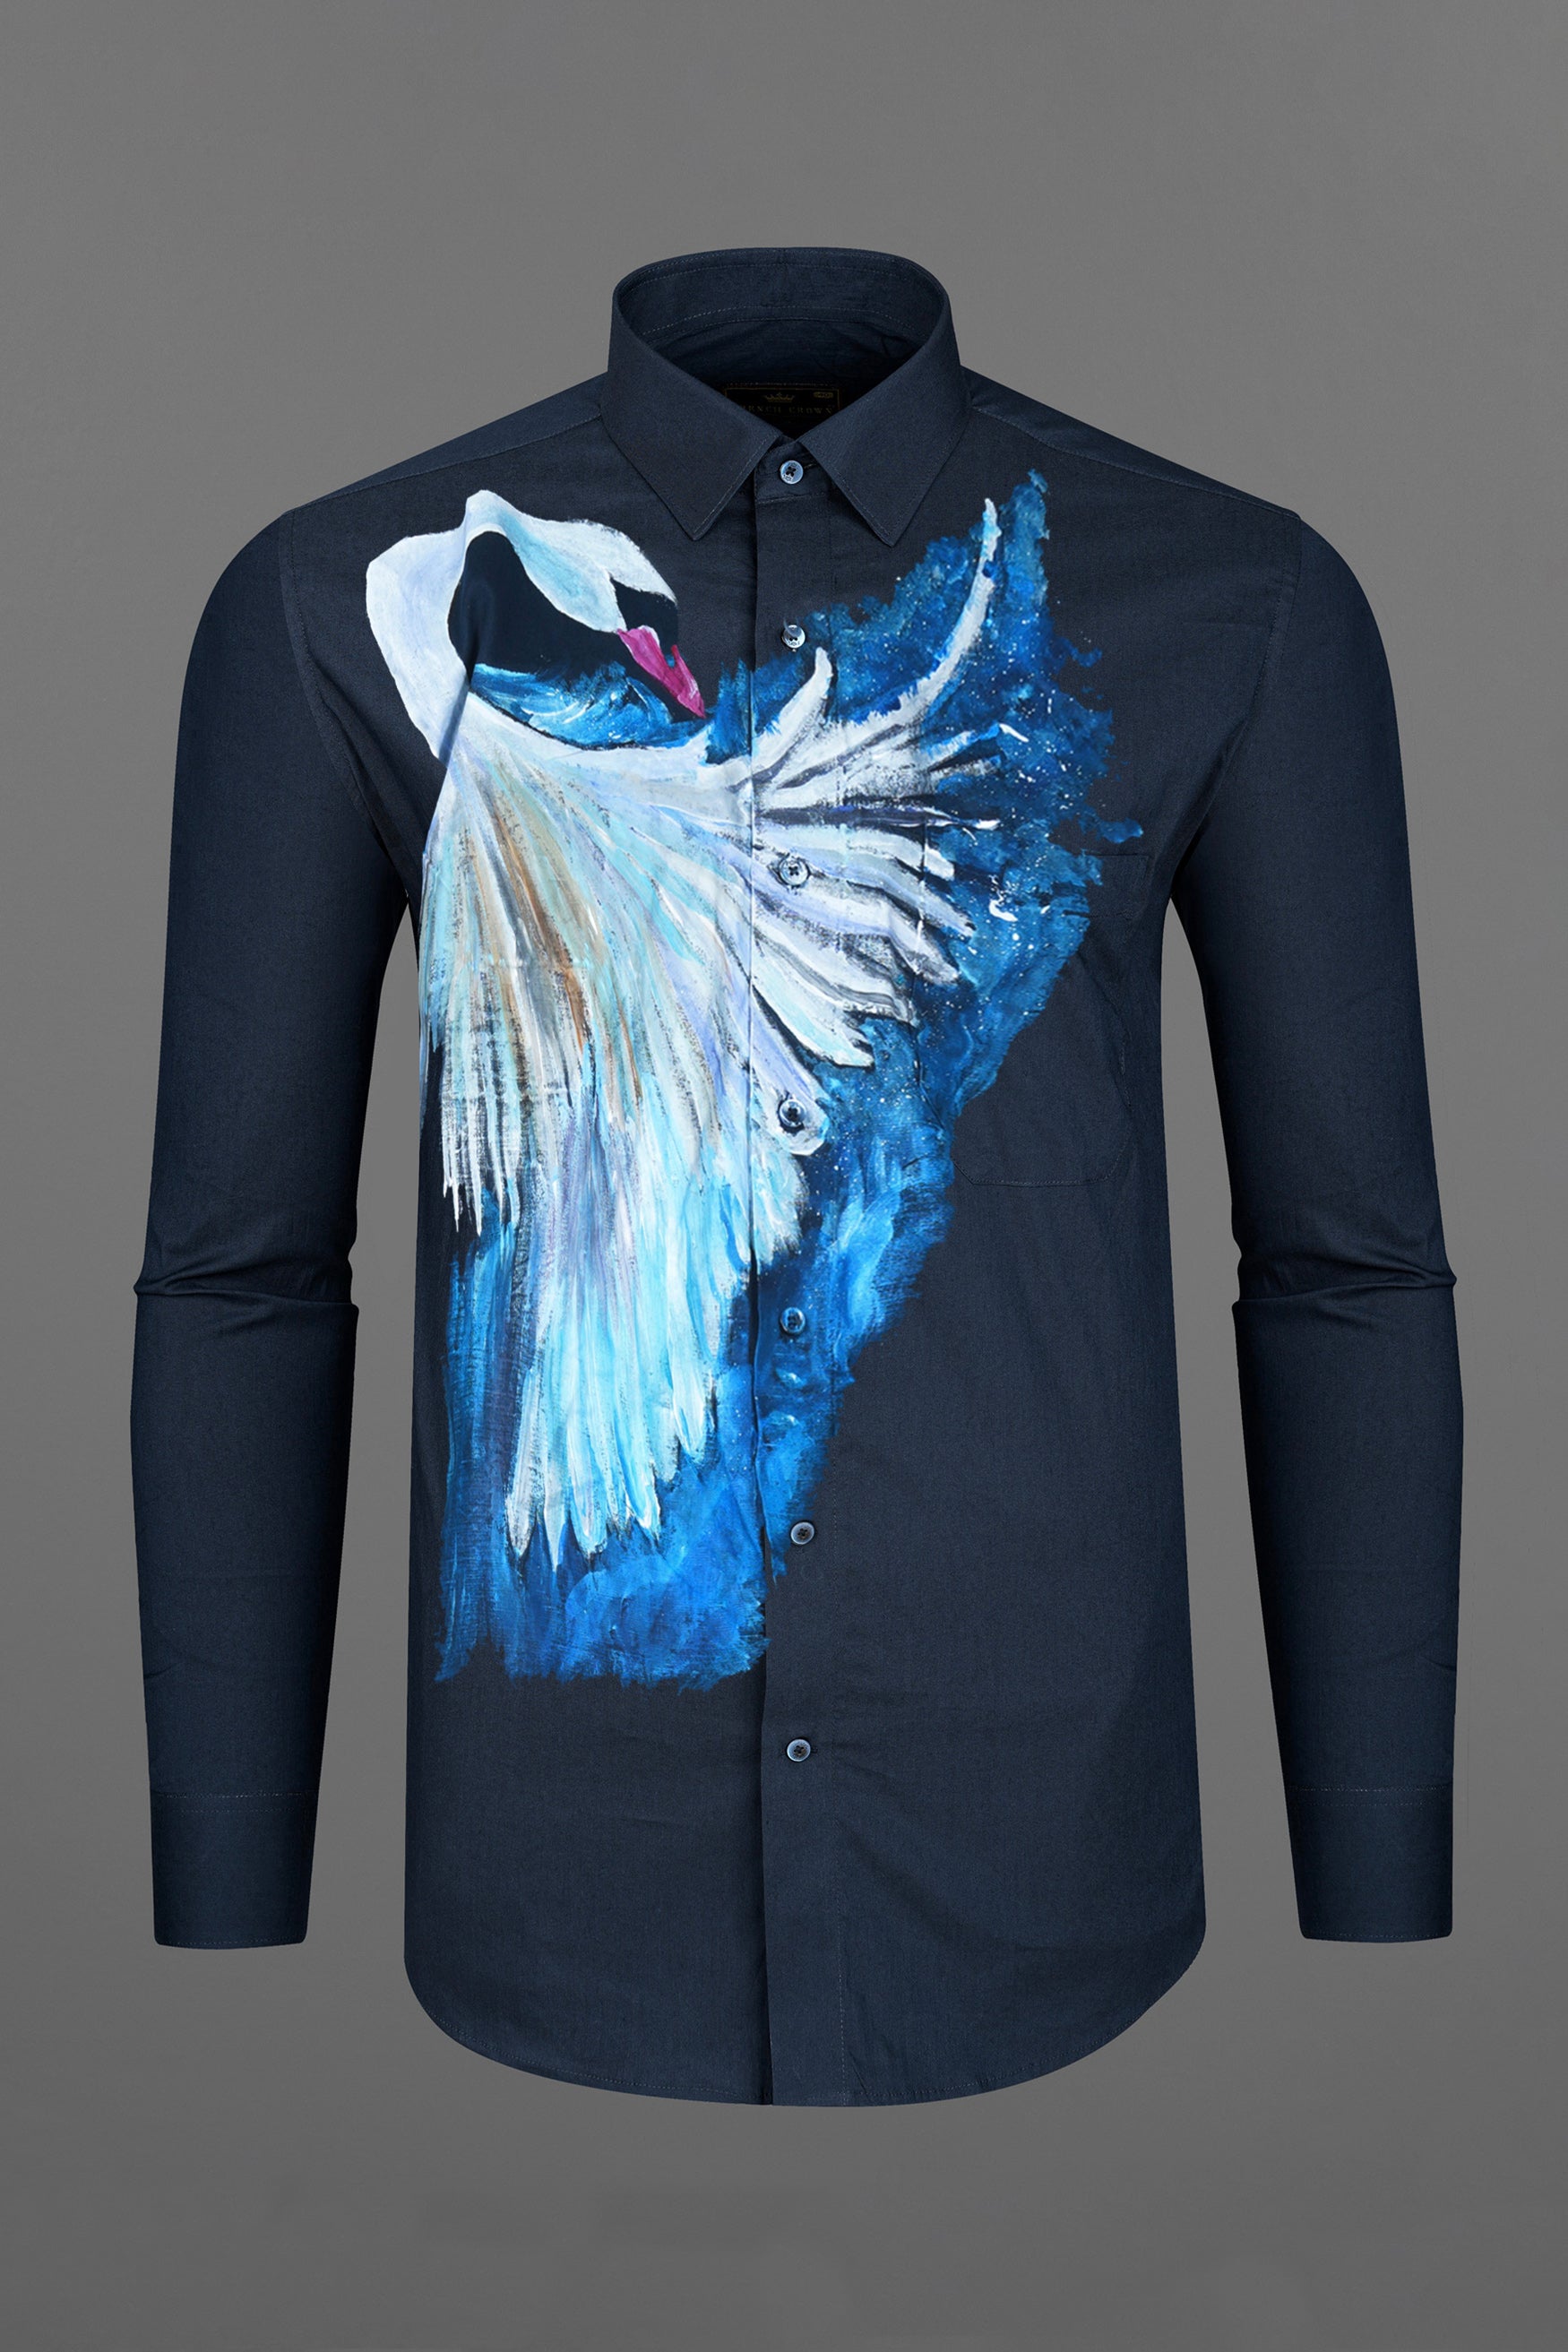 Firefly Navy Blue with Swan Hand Painted Premium Cotton Designer Shirt